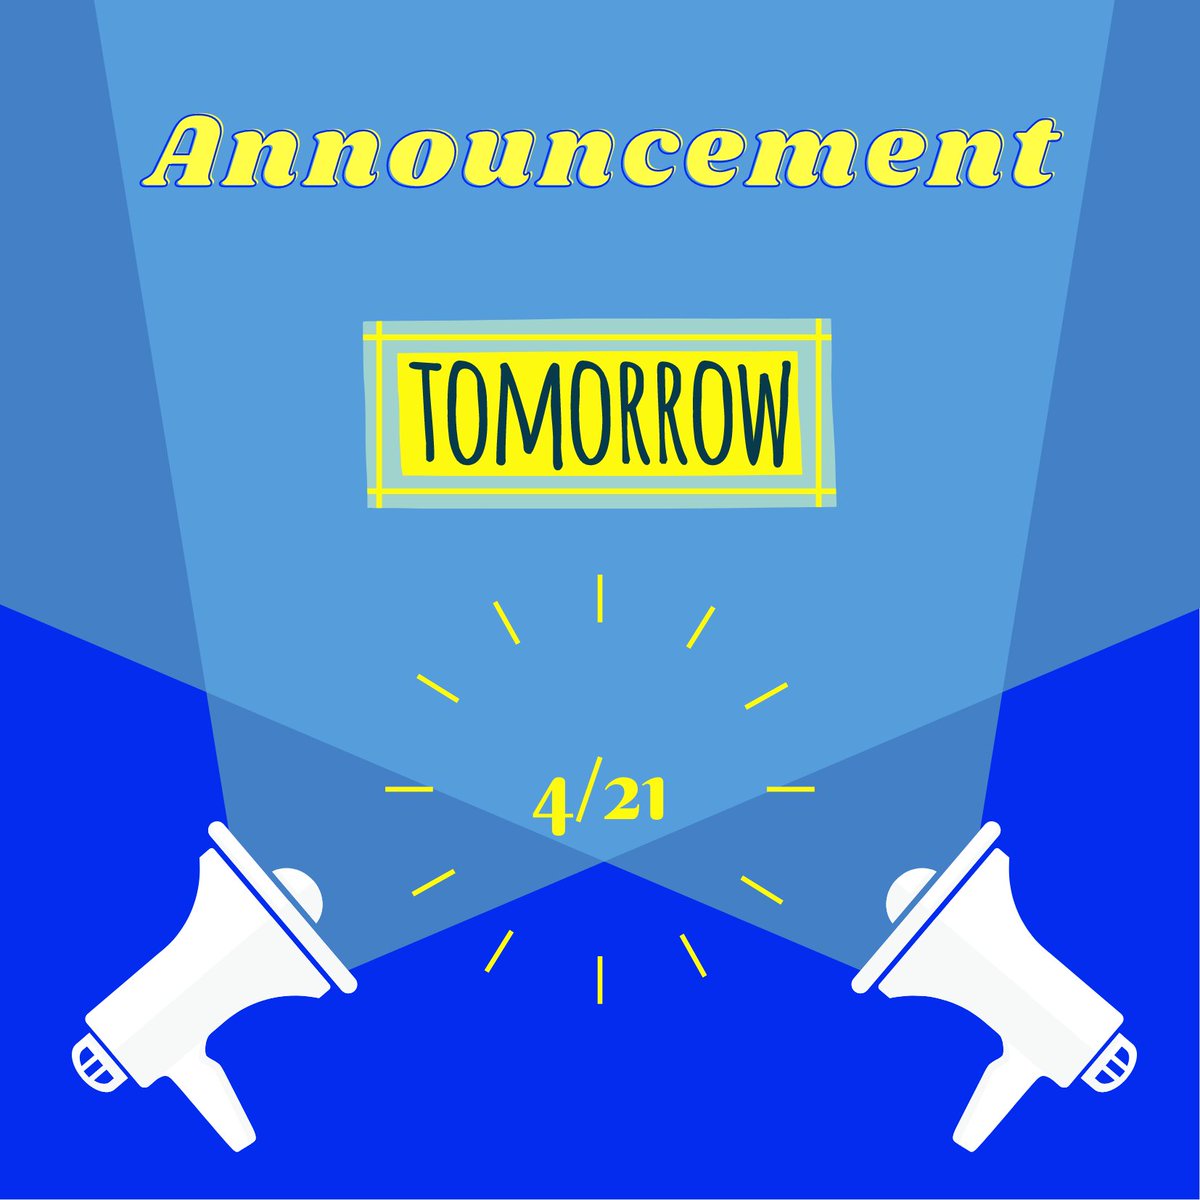 Stay tuned as we will have an announcement tomorrow for ALL of Lynnfield Little League Families!!! 

Does anyone have a guess at what we will be announcing? 

#LynnfieldLittleLeague #LynnfieldBaseball #LynnfieldPioneers #Thursday #ThursdayVibes